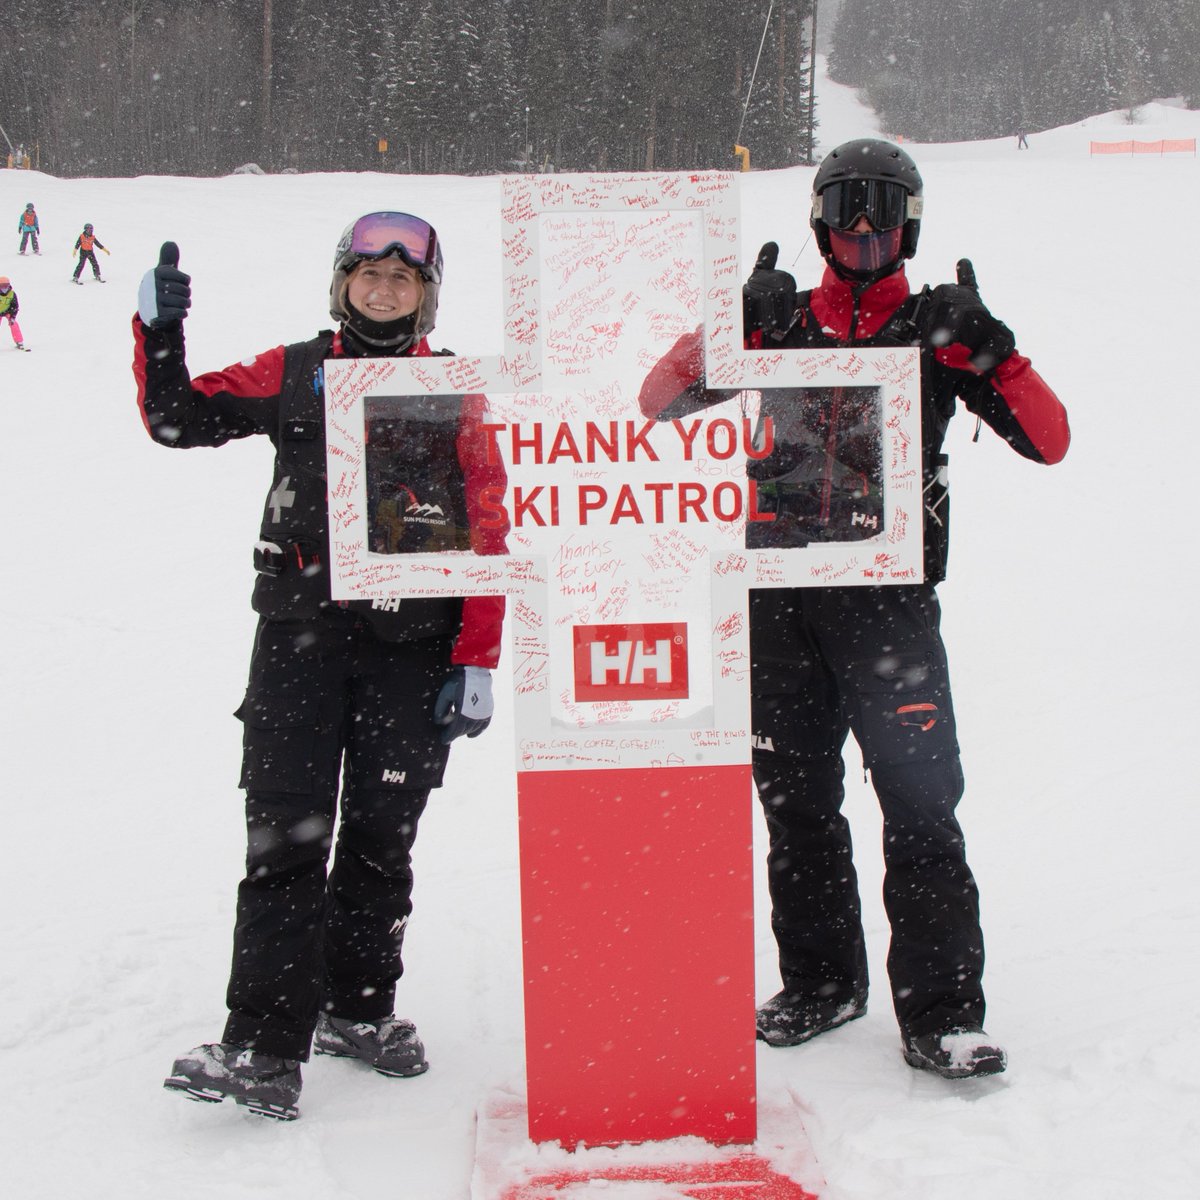 Thank you to ski patrollers in Sun Peaks and around the world this #InternationalSkiPatrolDay! Thanks to @HellyHansen and your kind written words, we’ve shared this white cross featuring appreciative messages with the employees and volunteers that make up Sun Peaks Patrol.